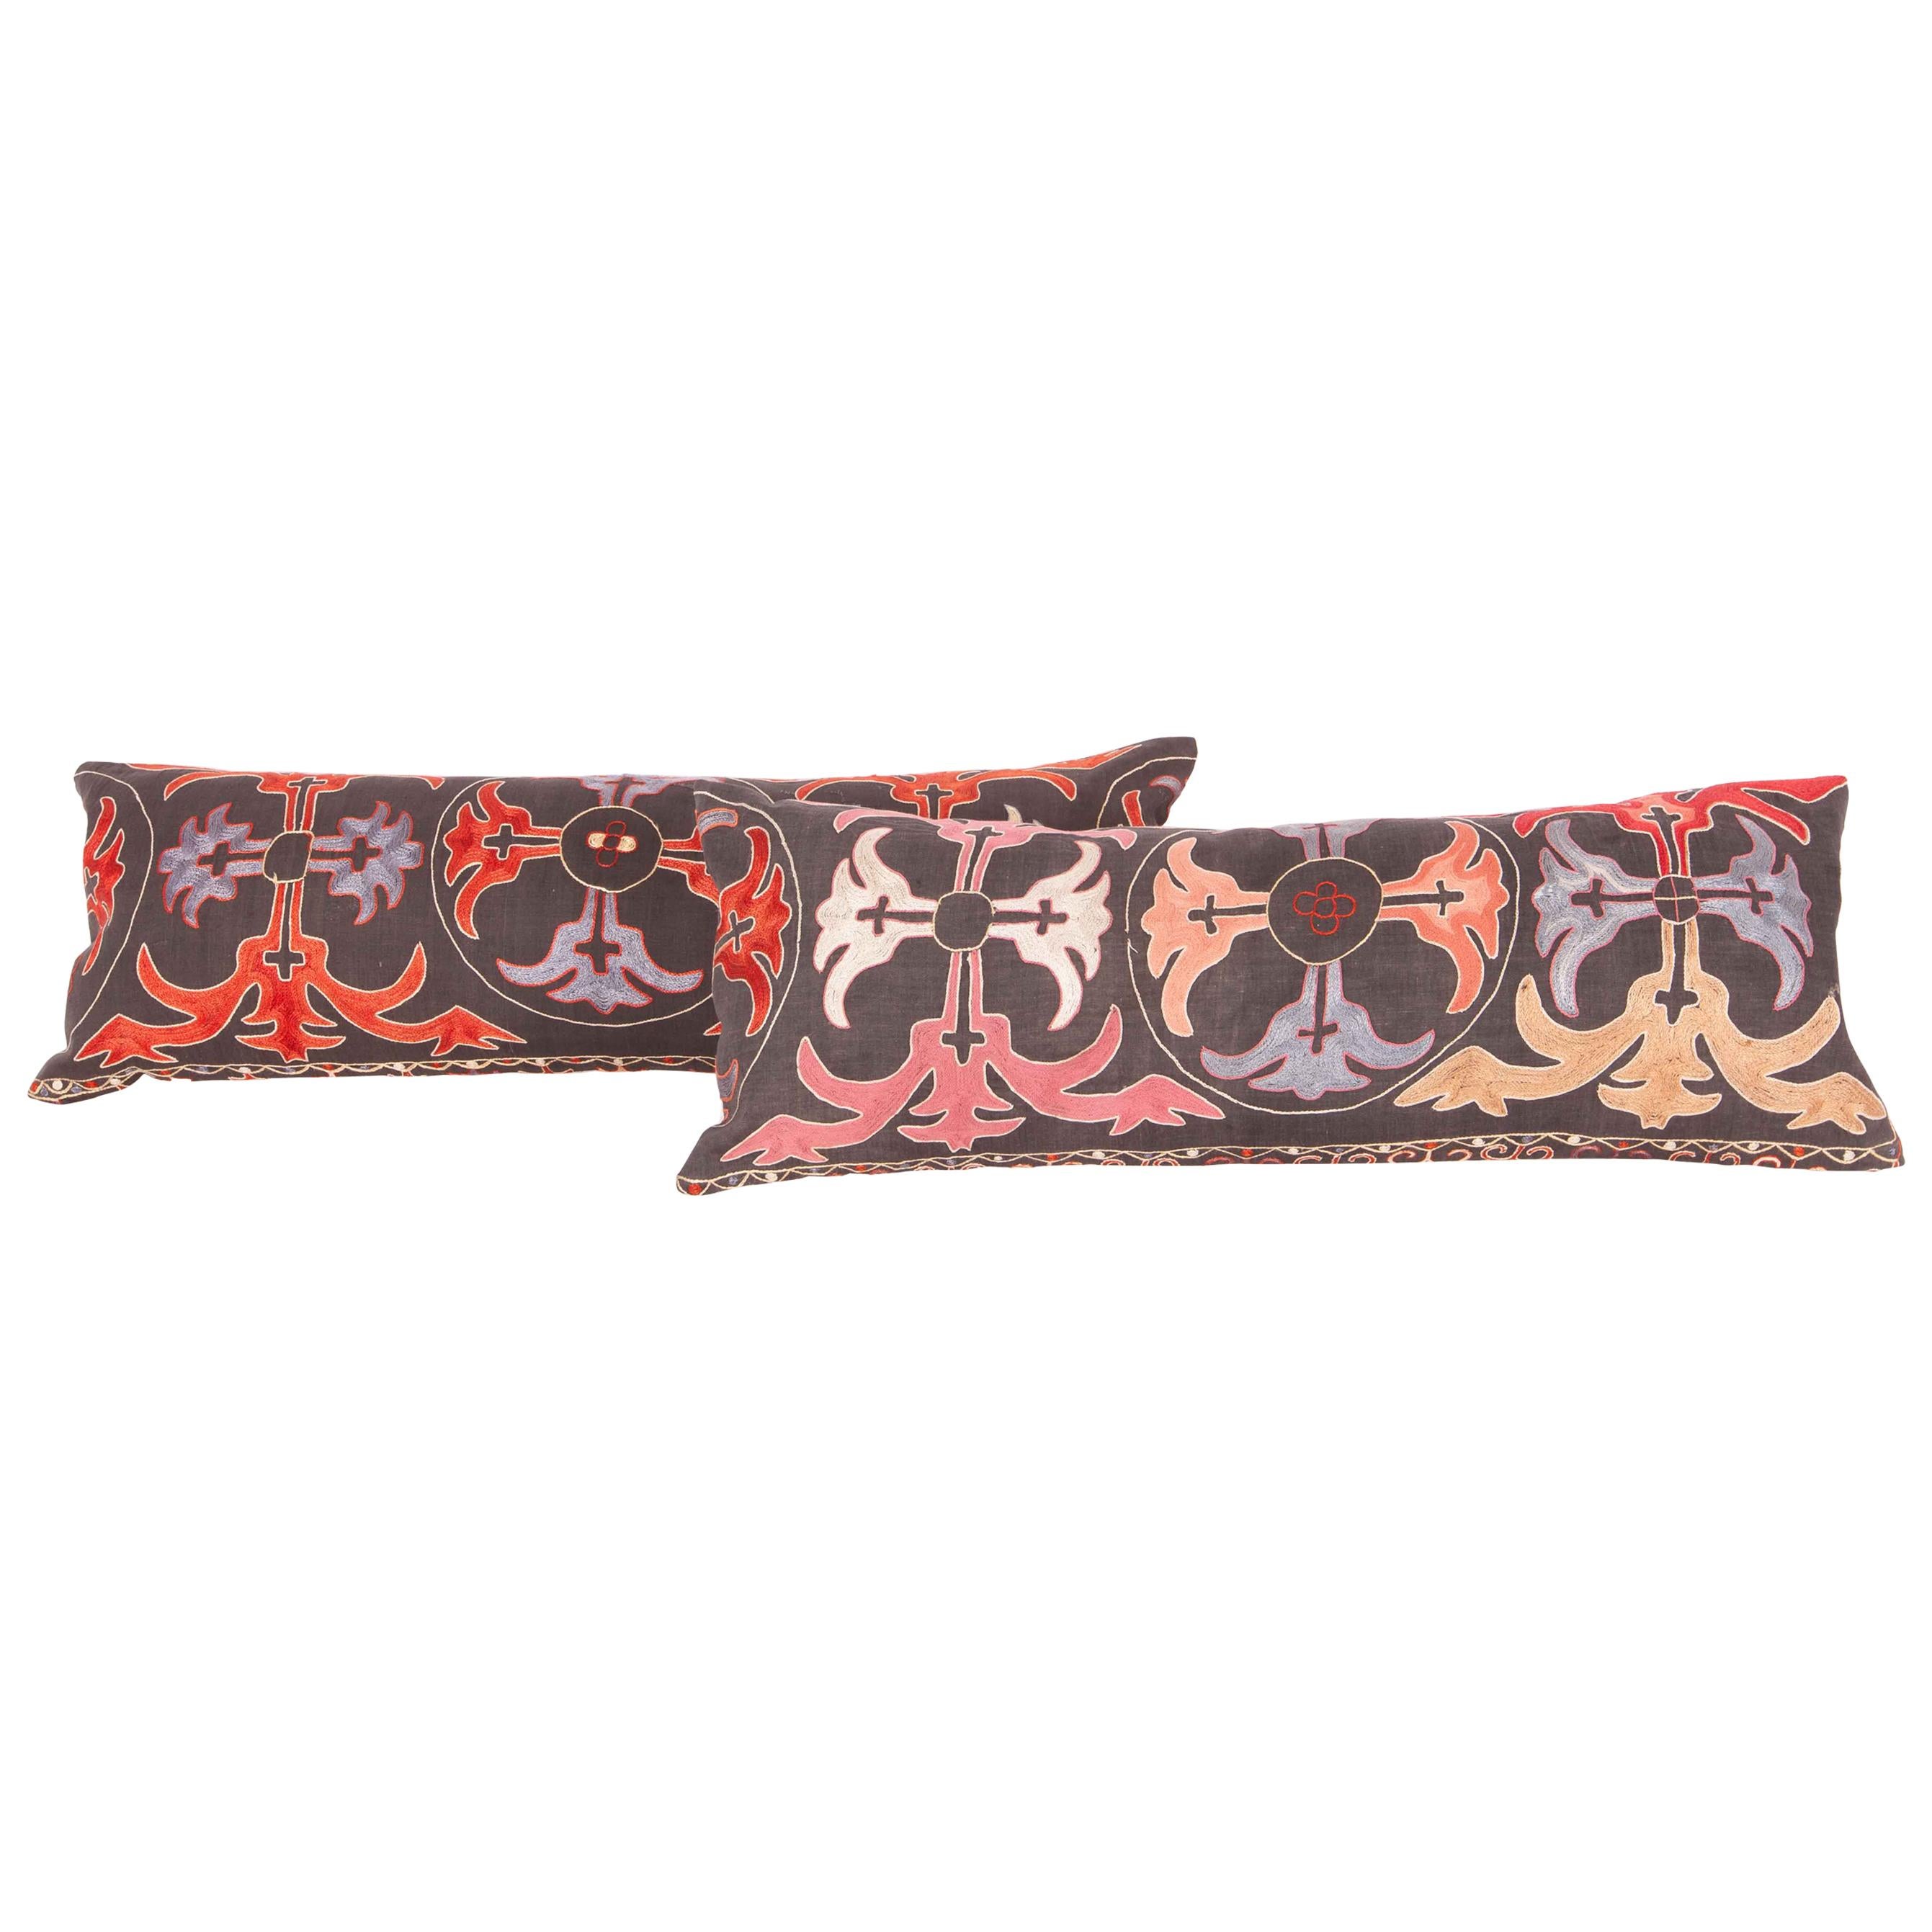 Vintage  Pillow Cases fashioned from a Kyrgyz or Kazak Embroidery